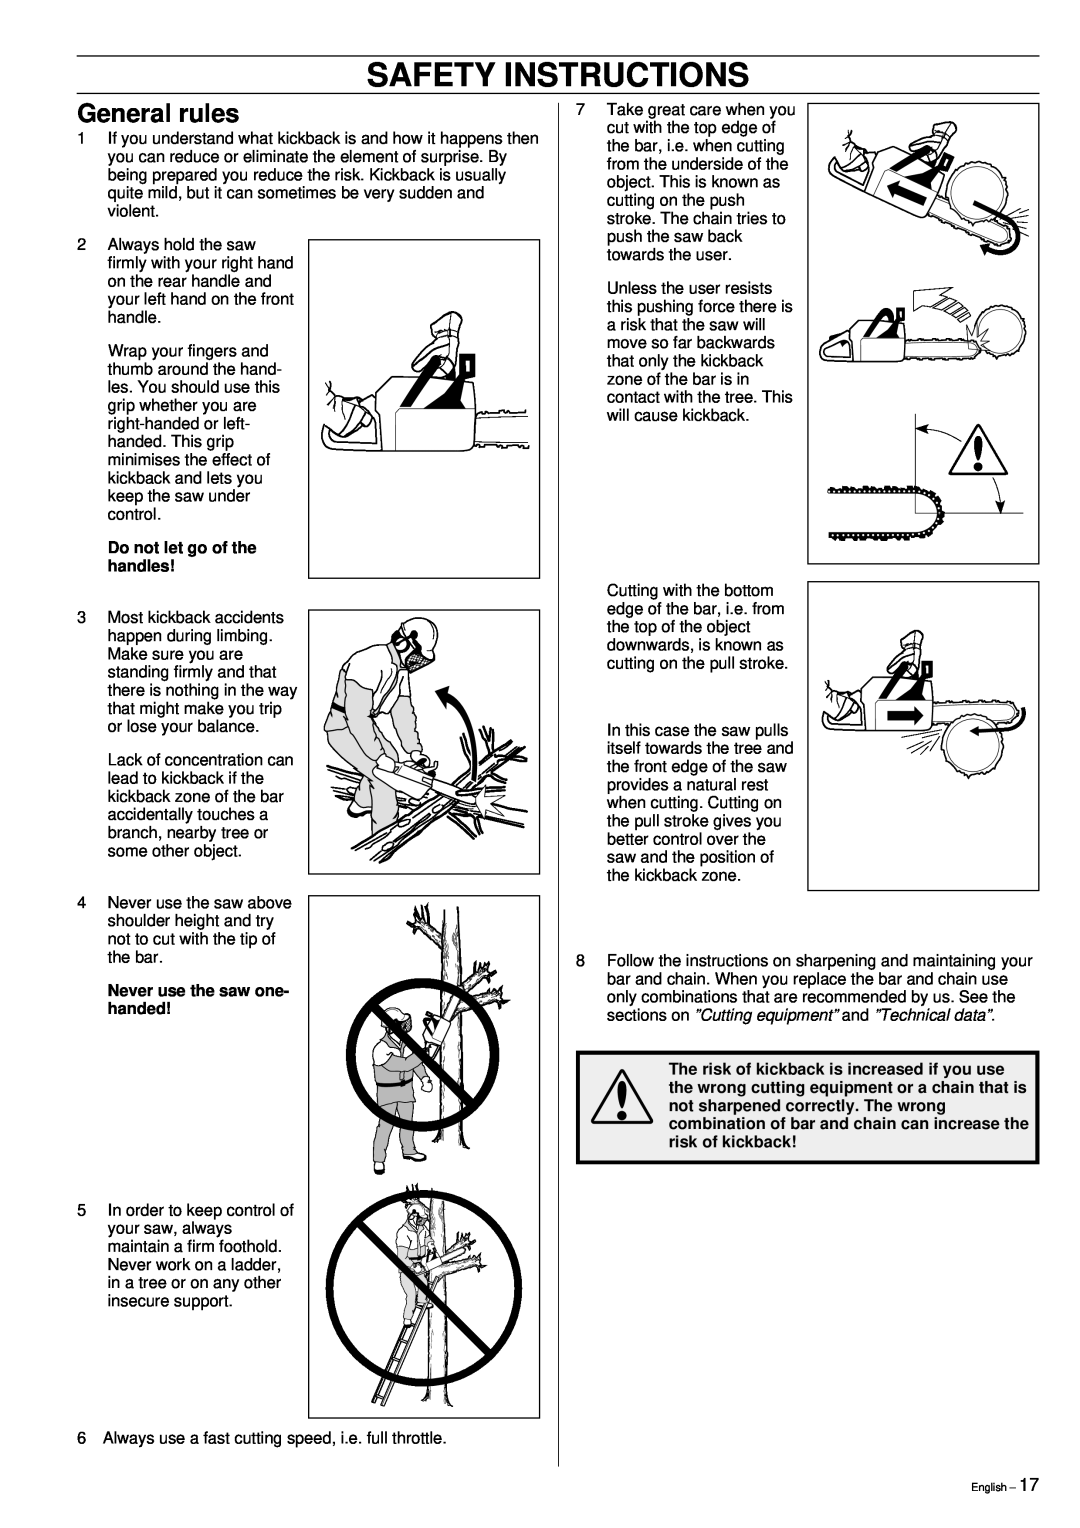 Jonsered 2159 manual General rules, Do not let go of the handles, Never use the saw one- handed, Safety Instructions 